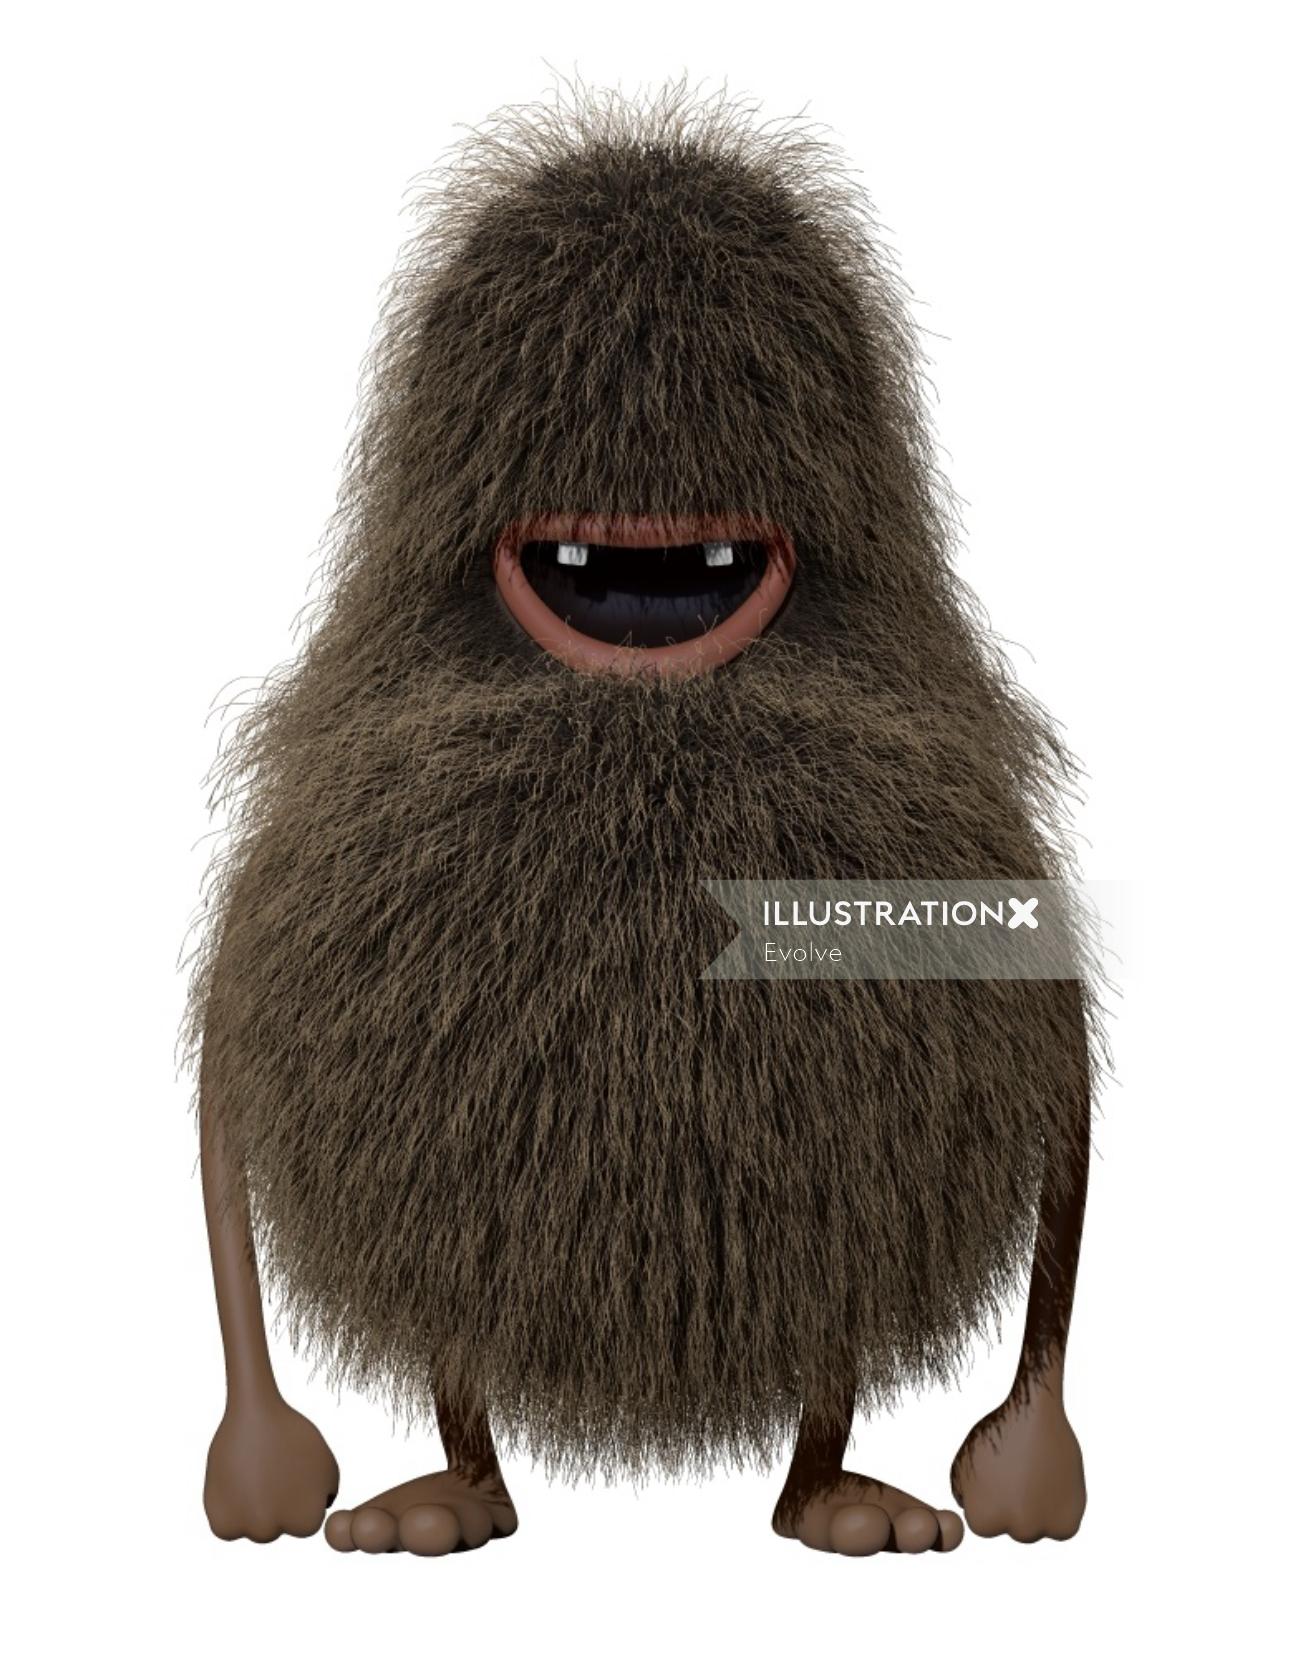 character design of hairy animal
